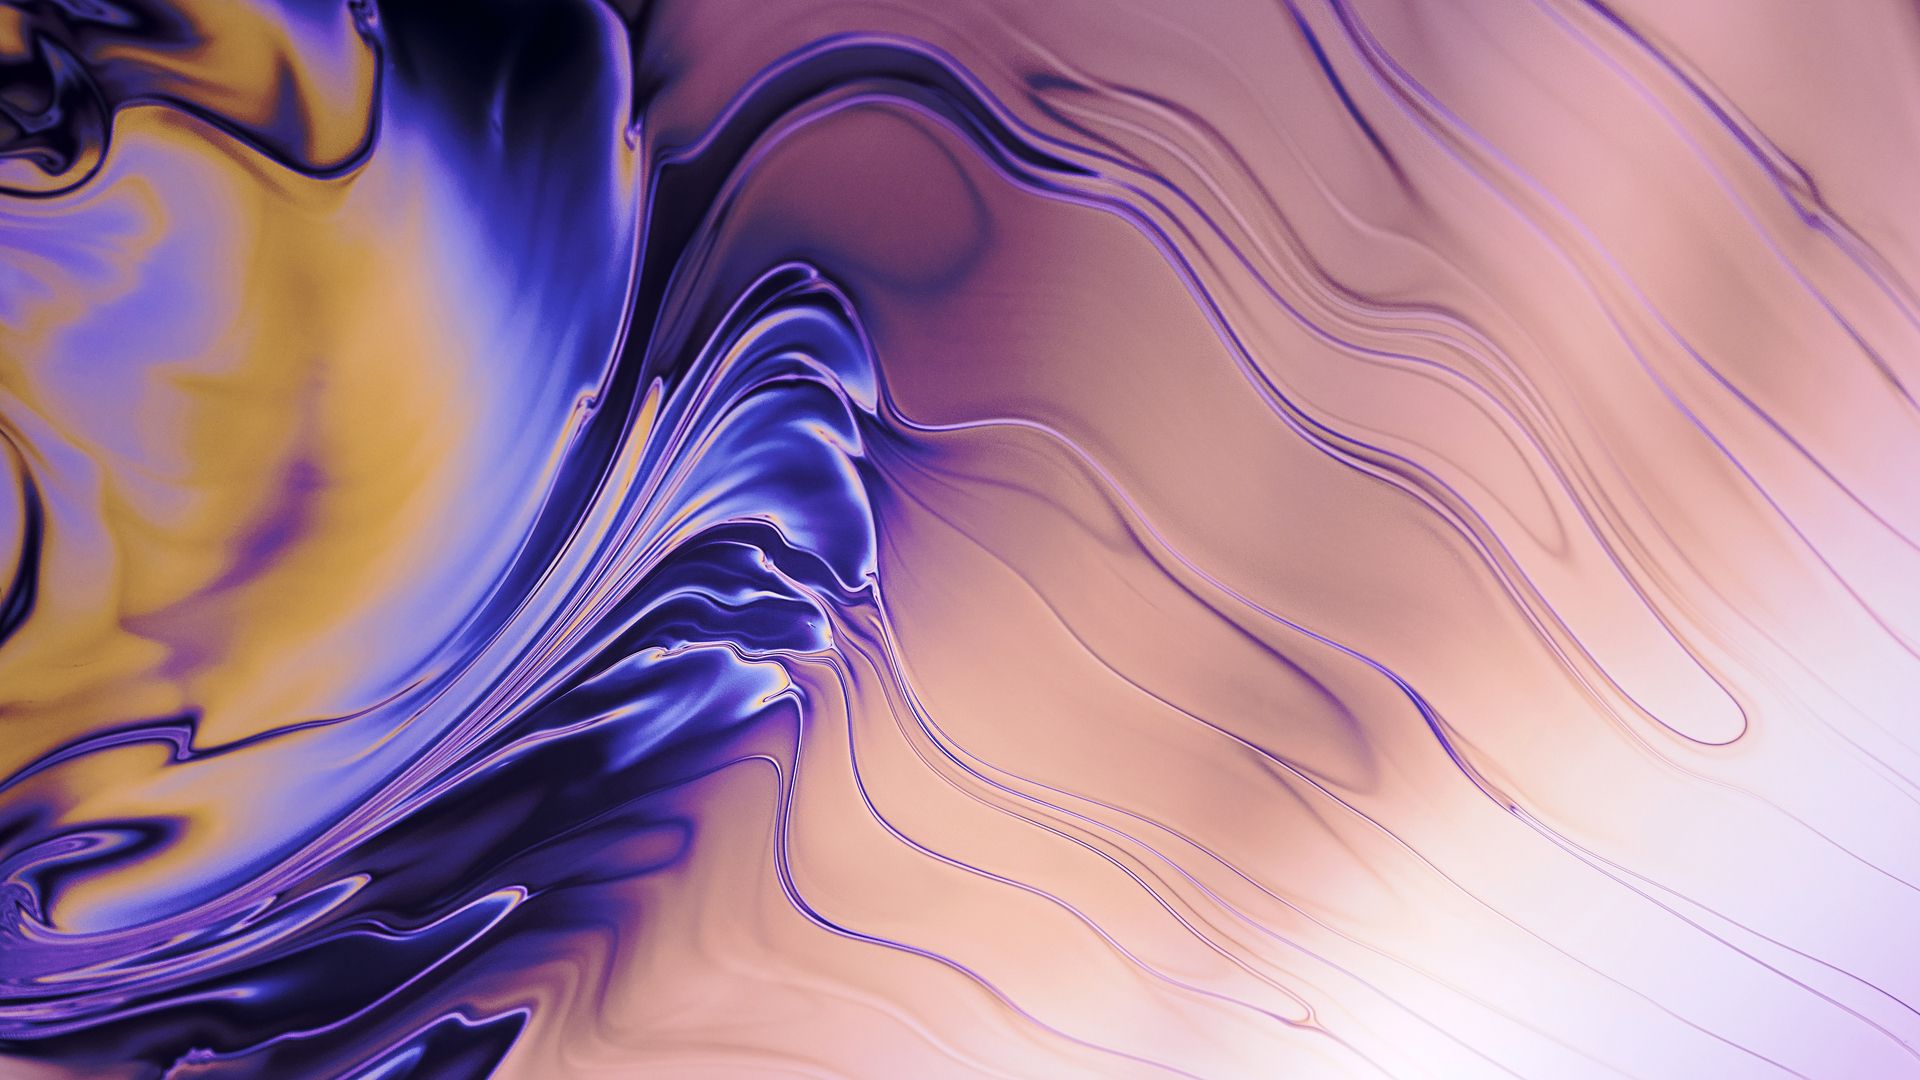 Abstract Liquid Flare 5k Laptop Full HD 1080P HD 4k Wallpaper, Image, Background, Photo and Picture